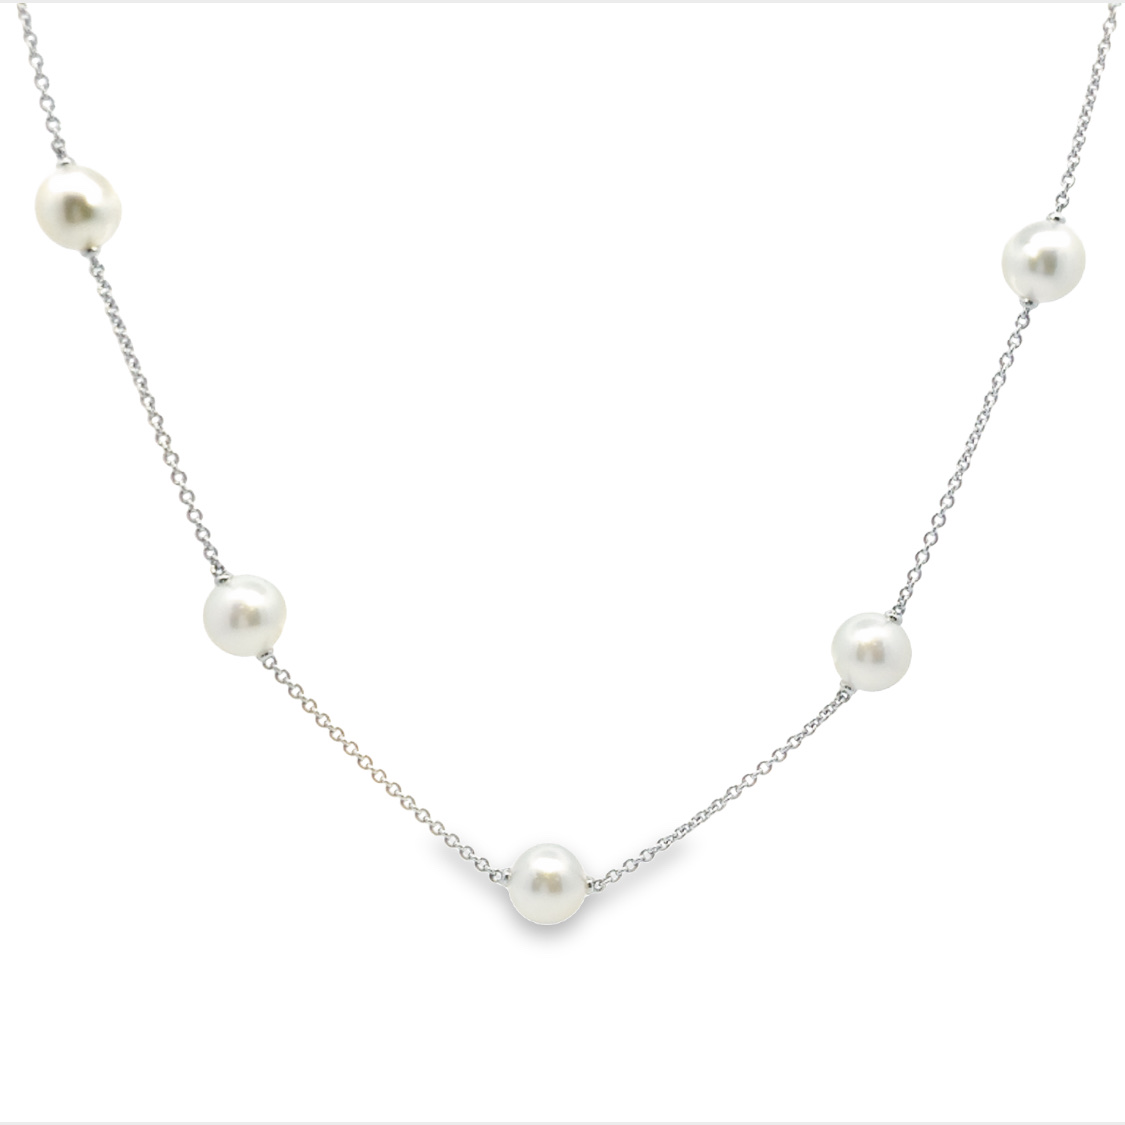 Mikimoto 18K White Gold Necklace with 7 Round White South Sea Pearls A+ 9mm